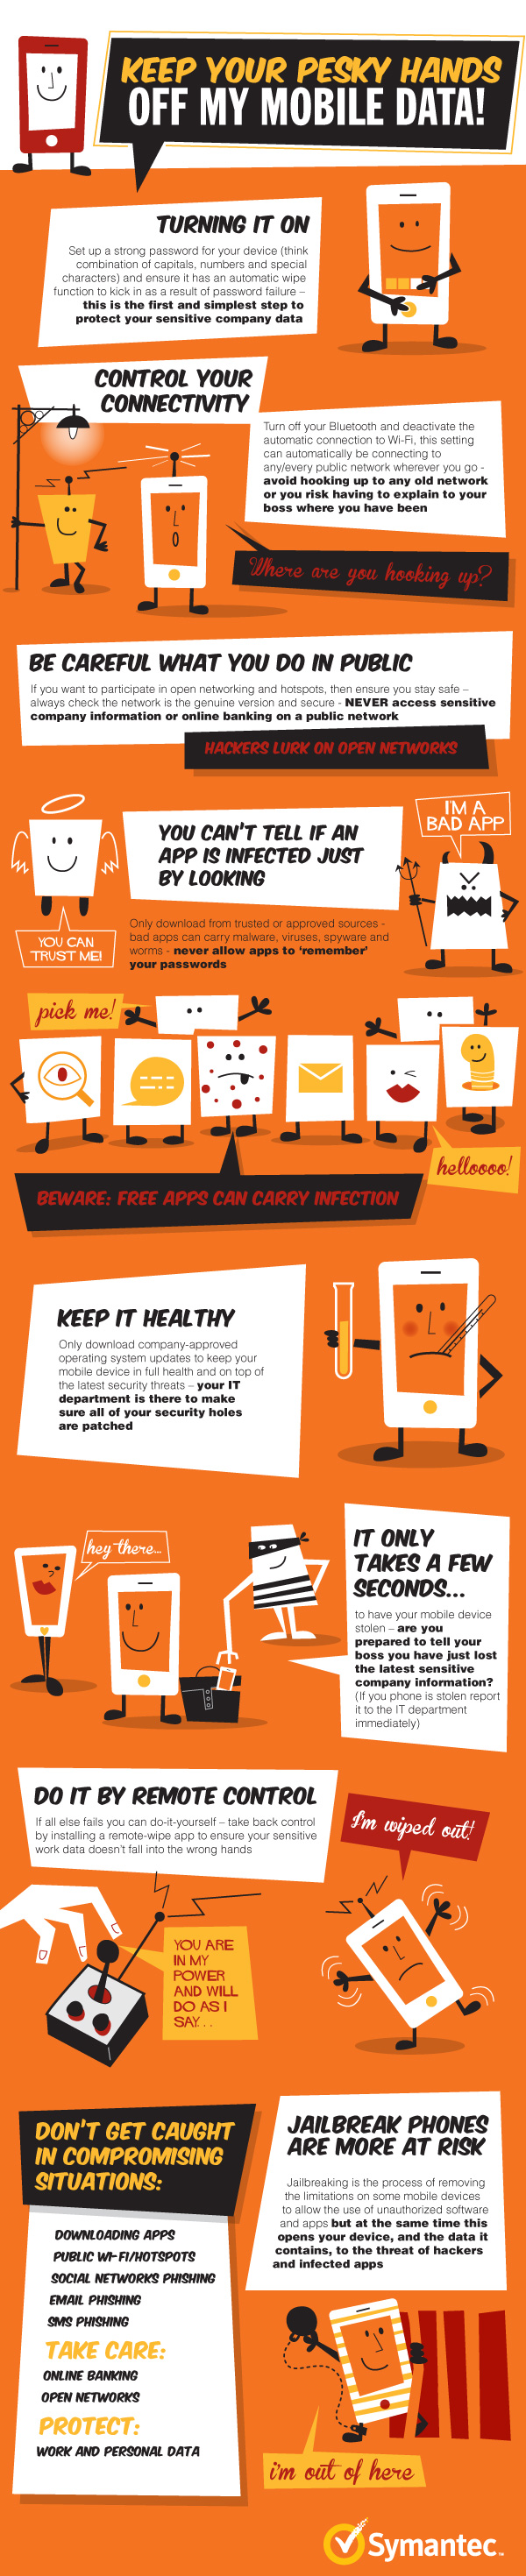 How to Keep Your Smartphone Safe & Secure